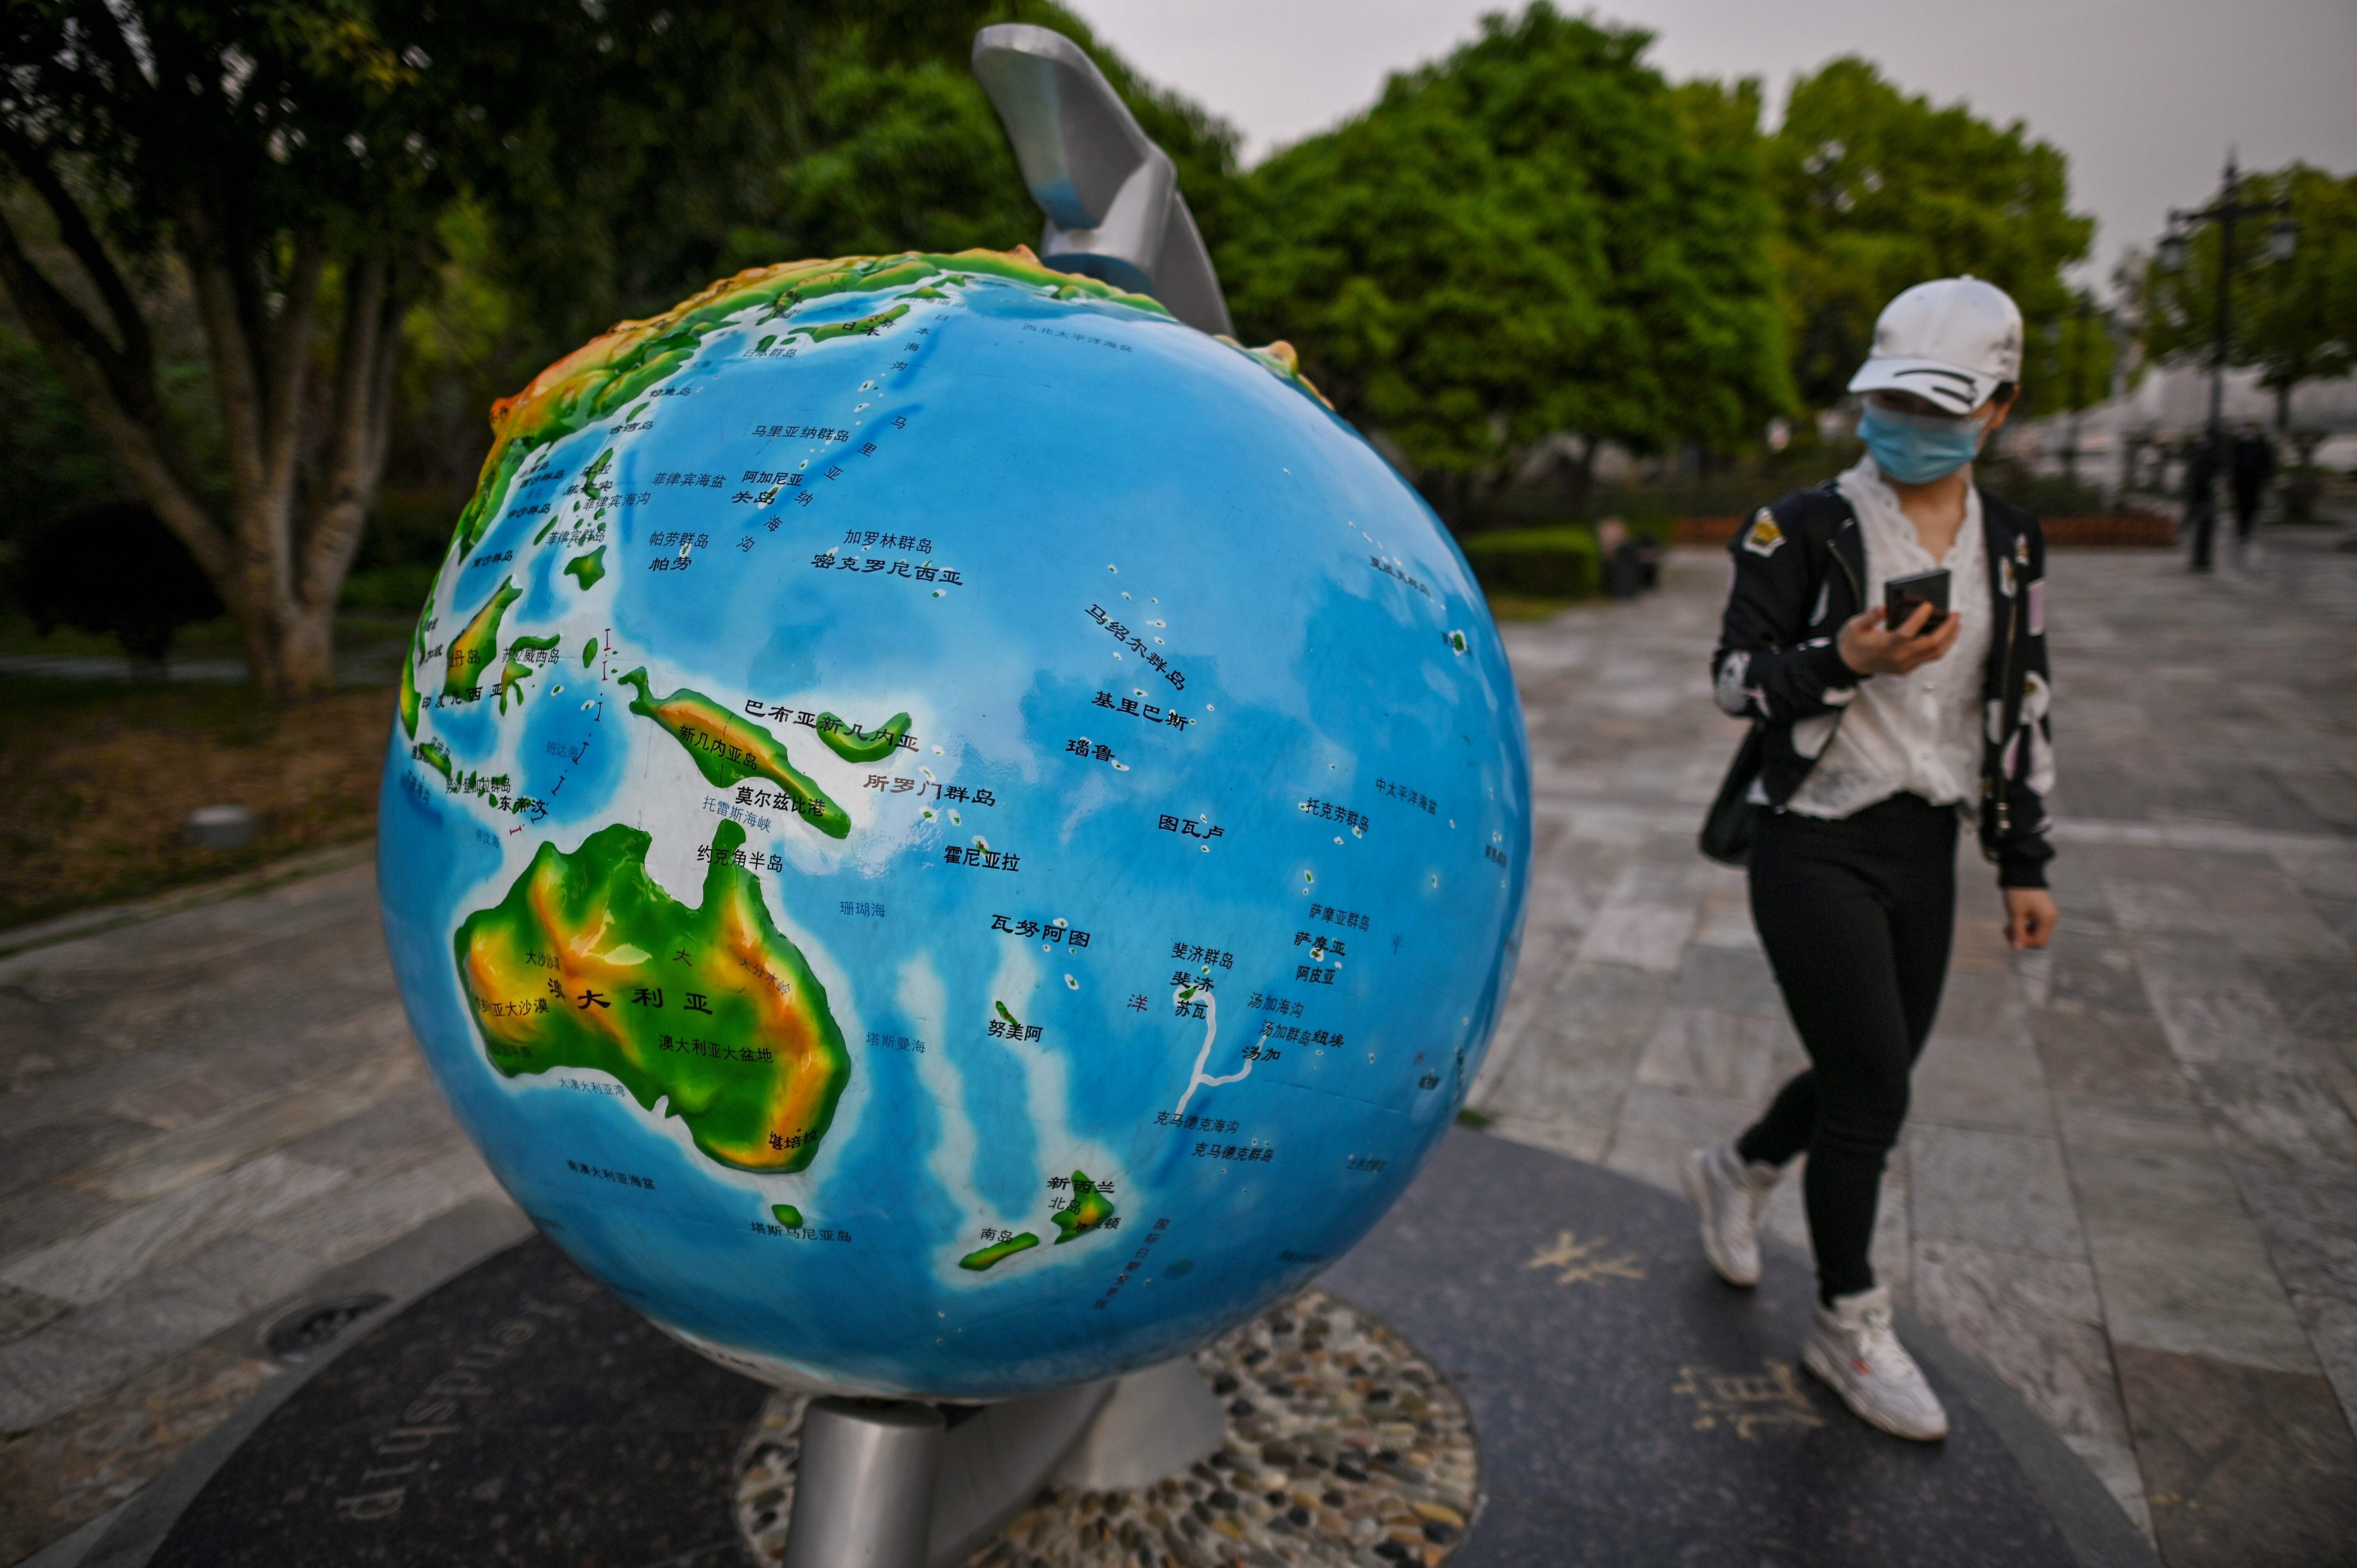 A woman wearing a face mask looks at a globe in a park in Wuhan, Hubei province, on April 8. China’s pandemic diplomacy should now focus on humanitarian efforts, rather than a clumsy, self-righteous global political campaign. Photo: AFP